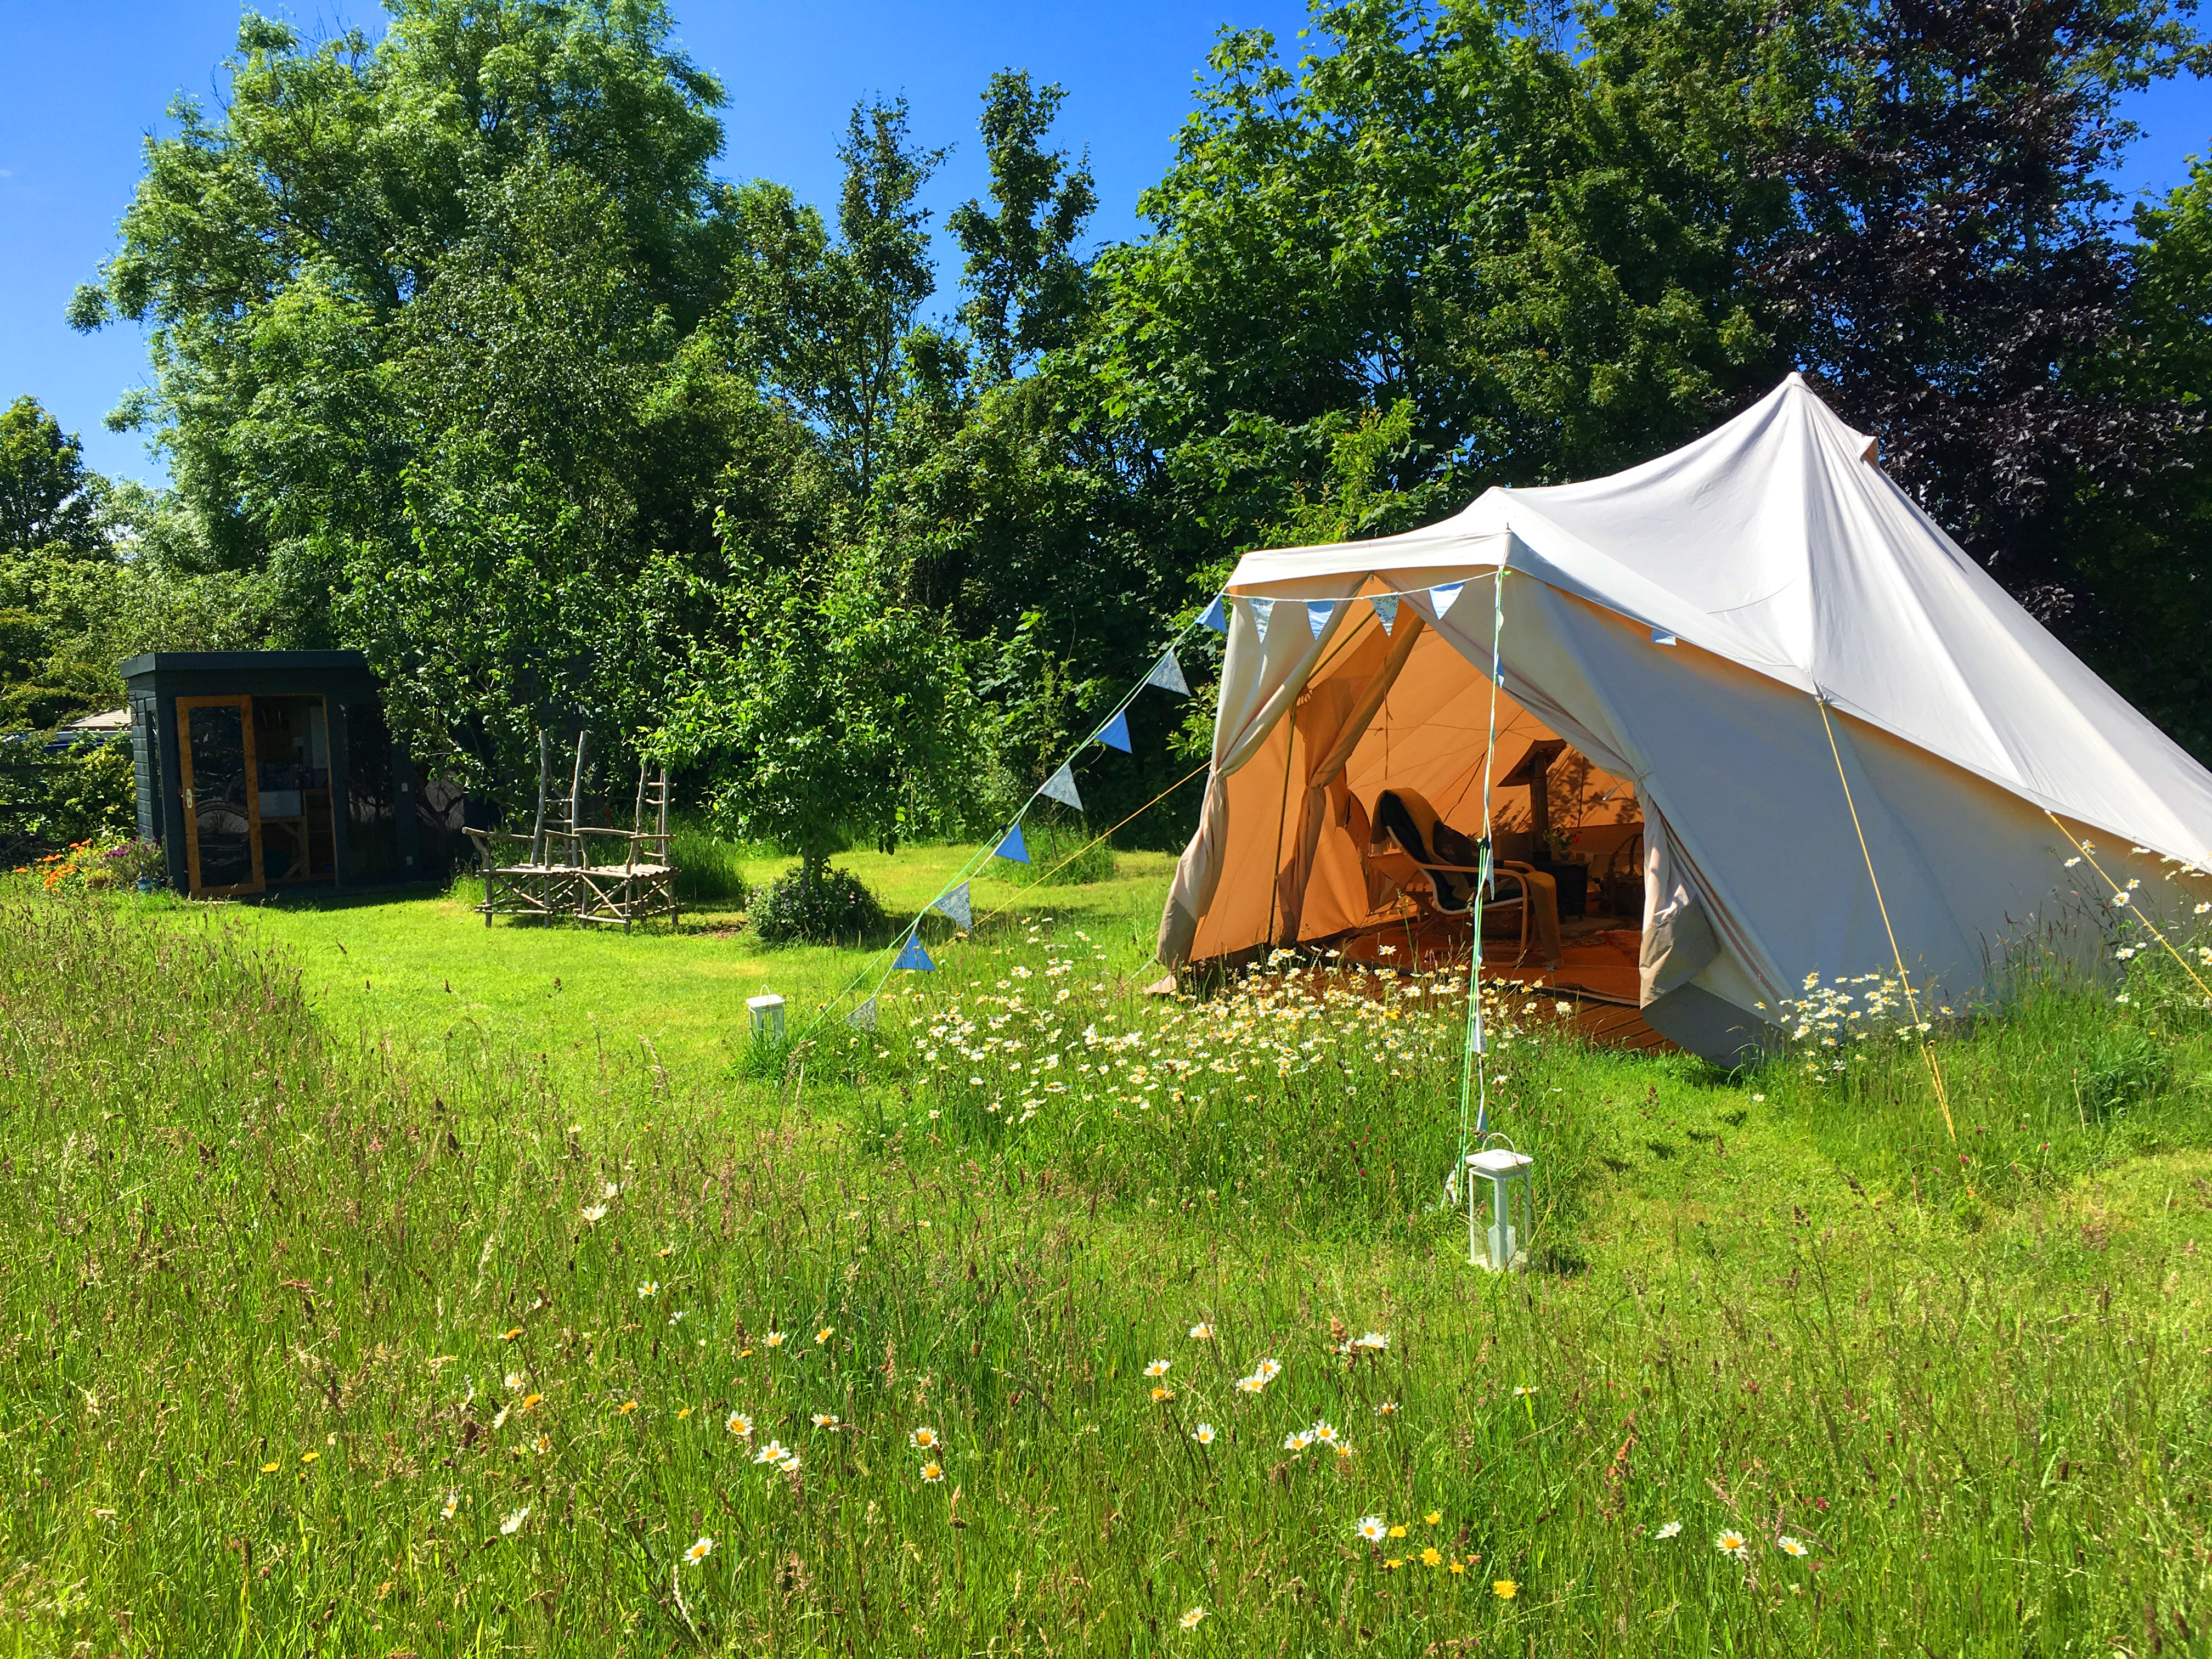 Exclusive Cotswold Glamping @Part Time Nomad - Tents for Rent in Hawkesbury  Upton, England, United Kingdom